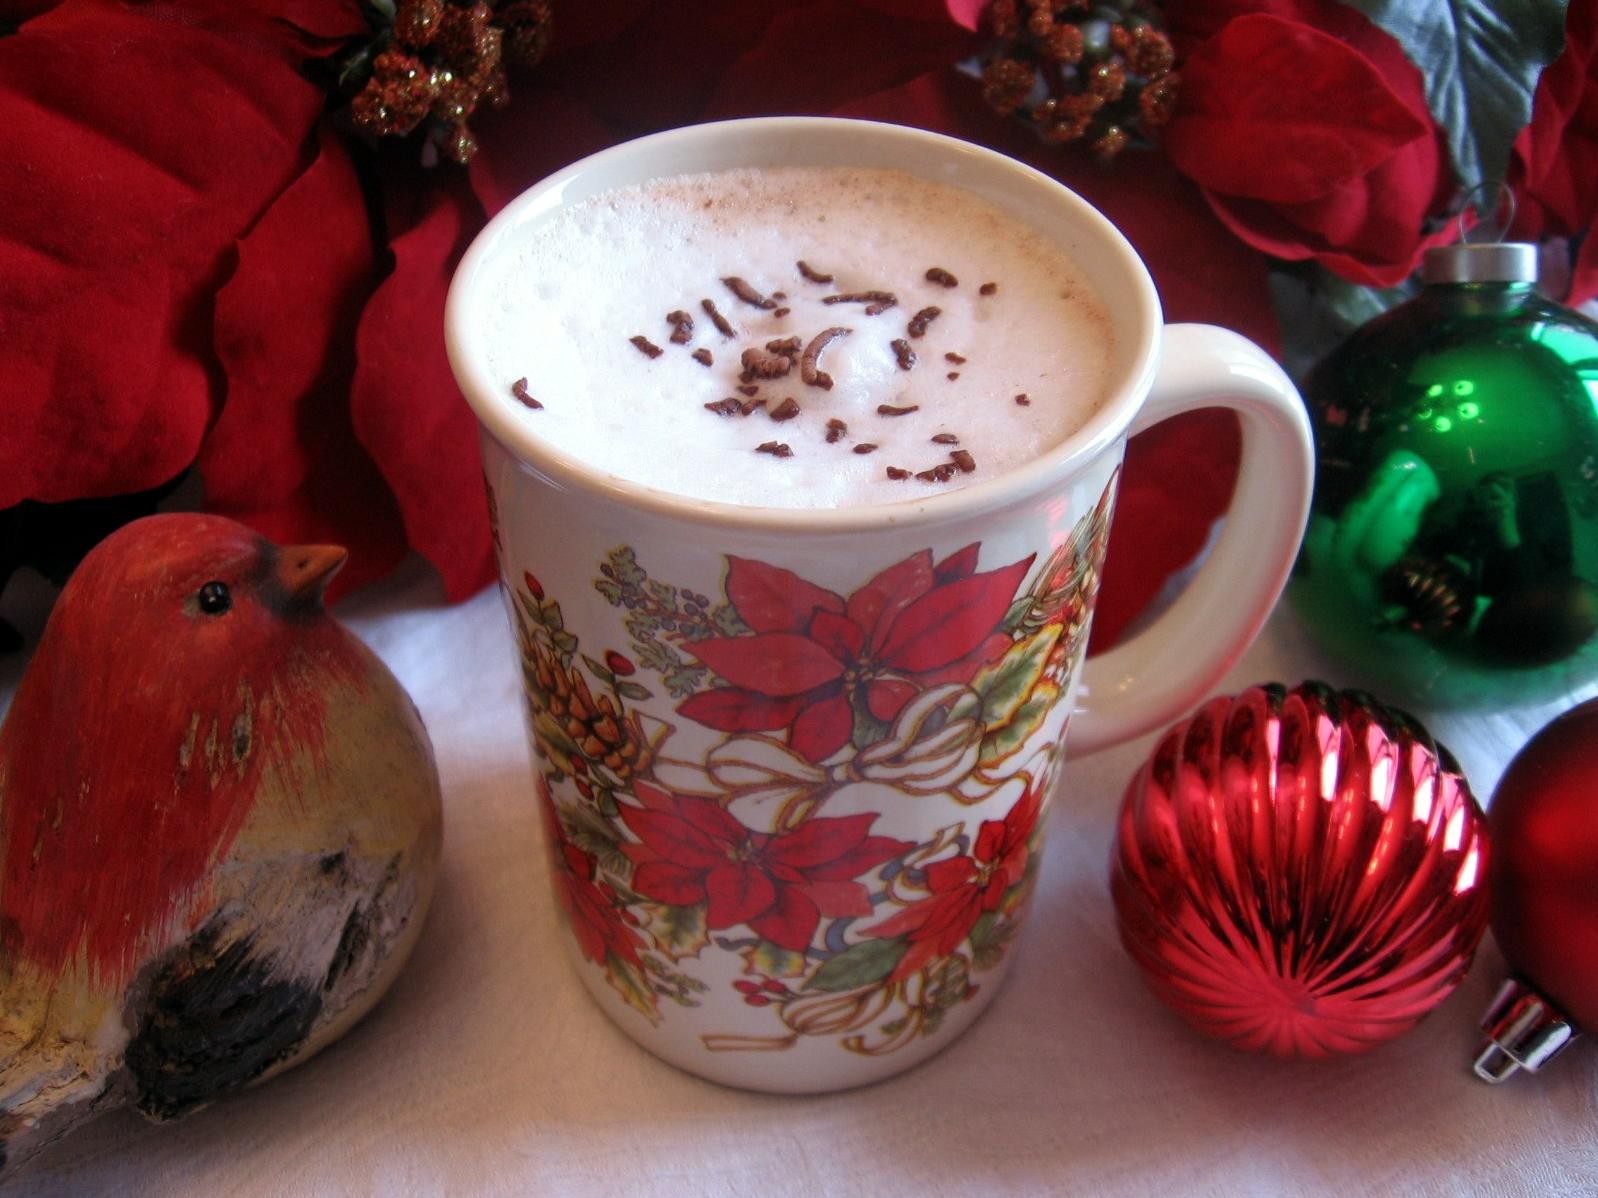  Give yourself the gift of pure bliss, try out our Mocha Hot Chocolate recipe now!